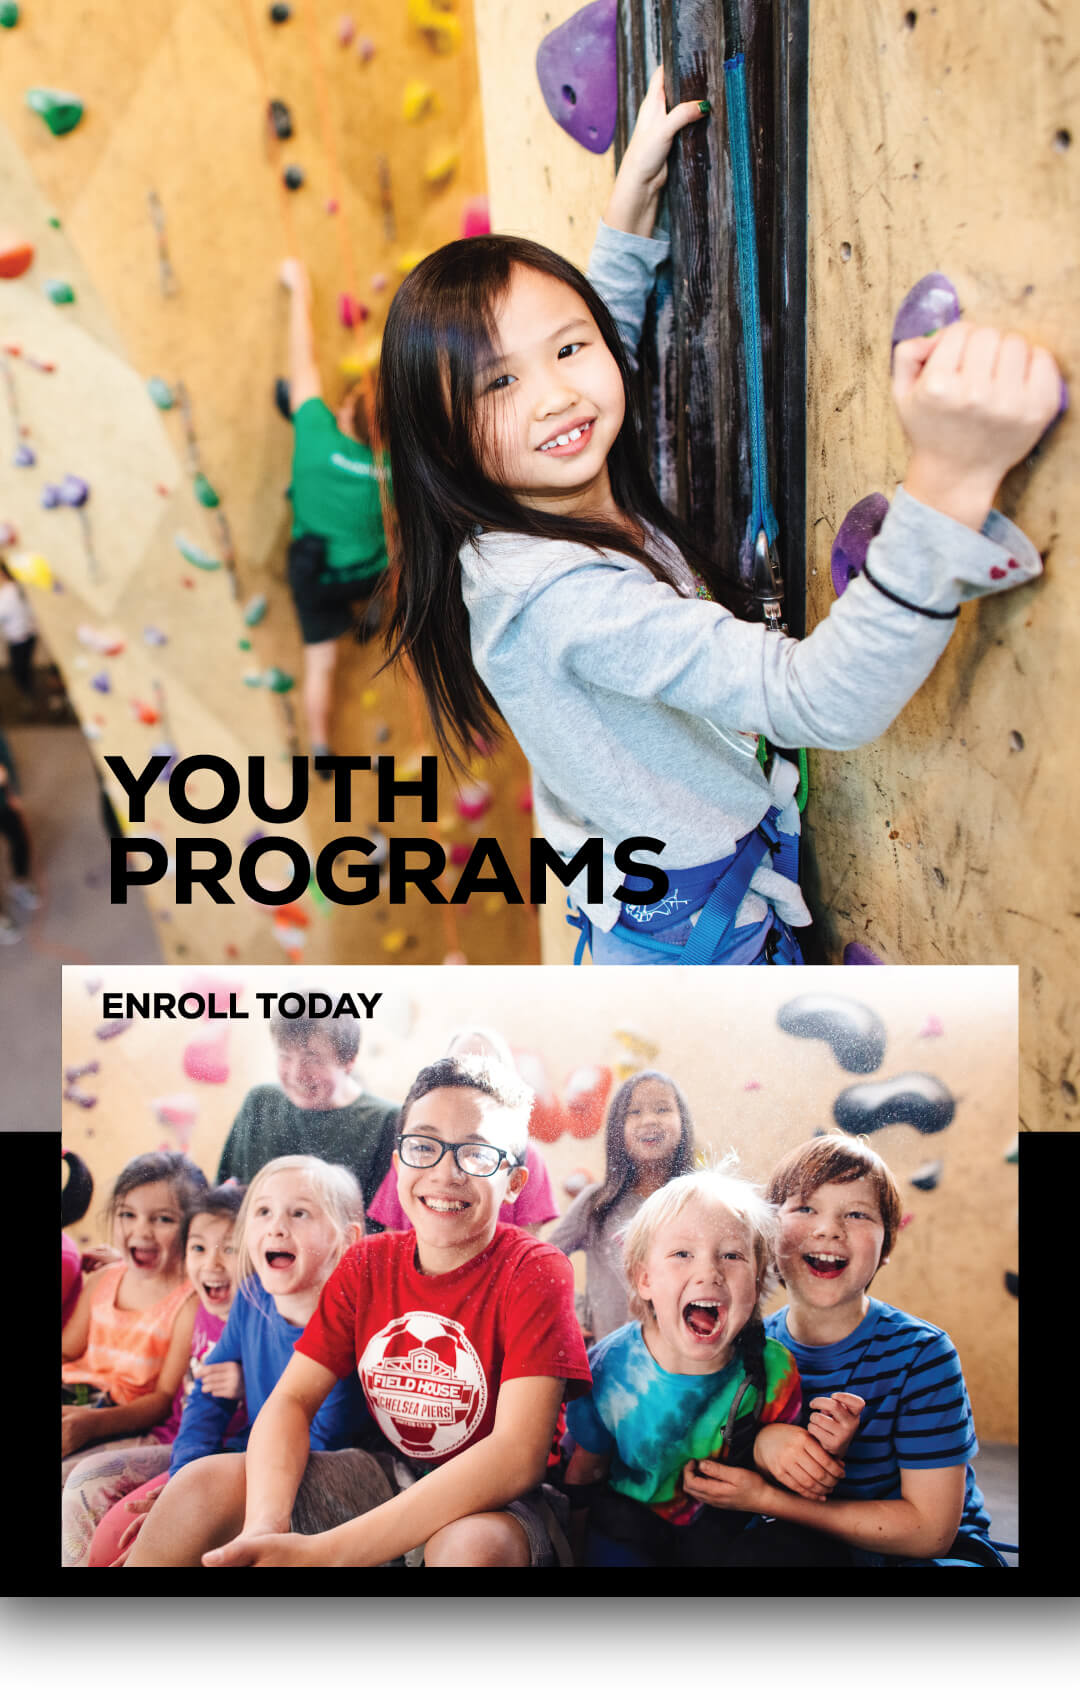 YOUTH PROGRAMS